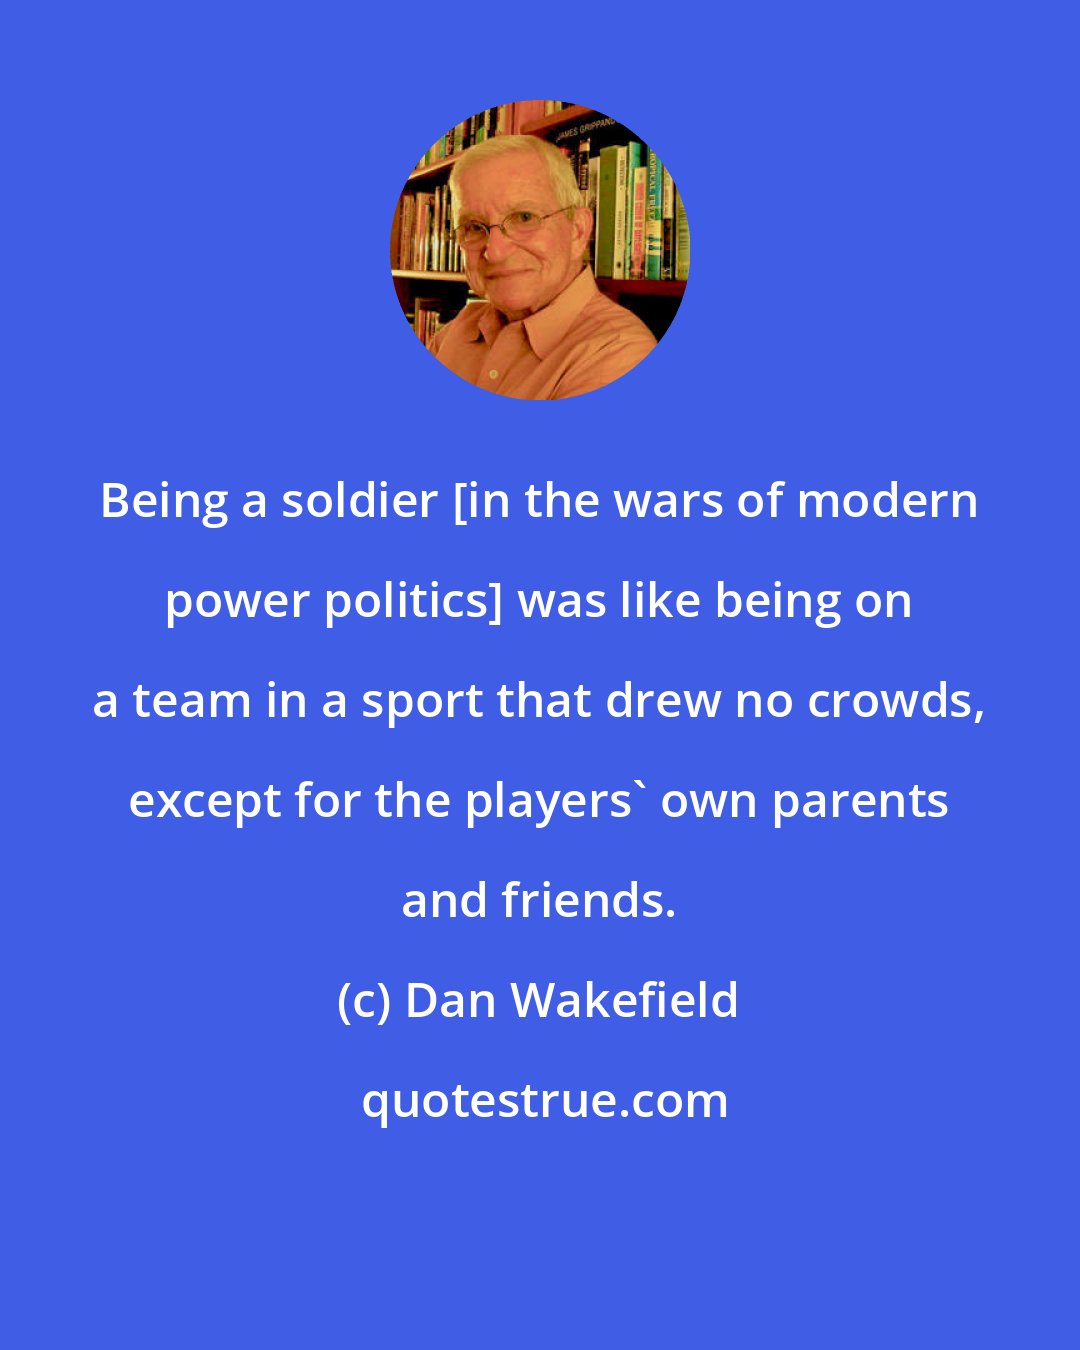 Dan Wakefield: Being a soldier [in the wars of modern power politics] was like being on a team in a sport that drew no crowds, except for the players' own parents and friends.